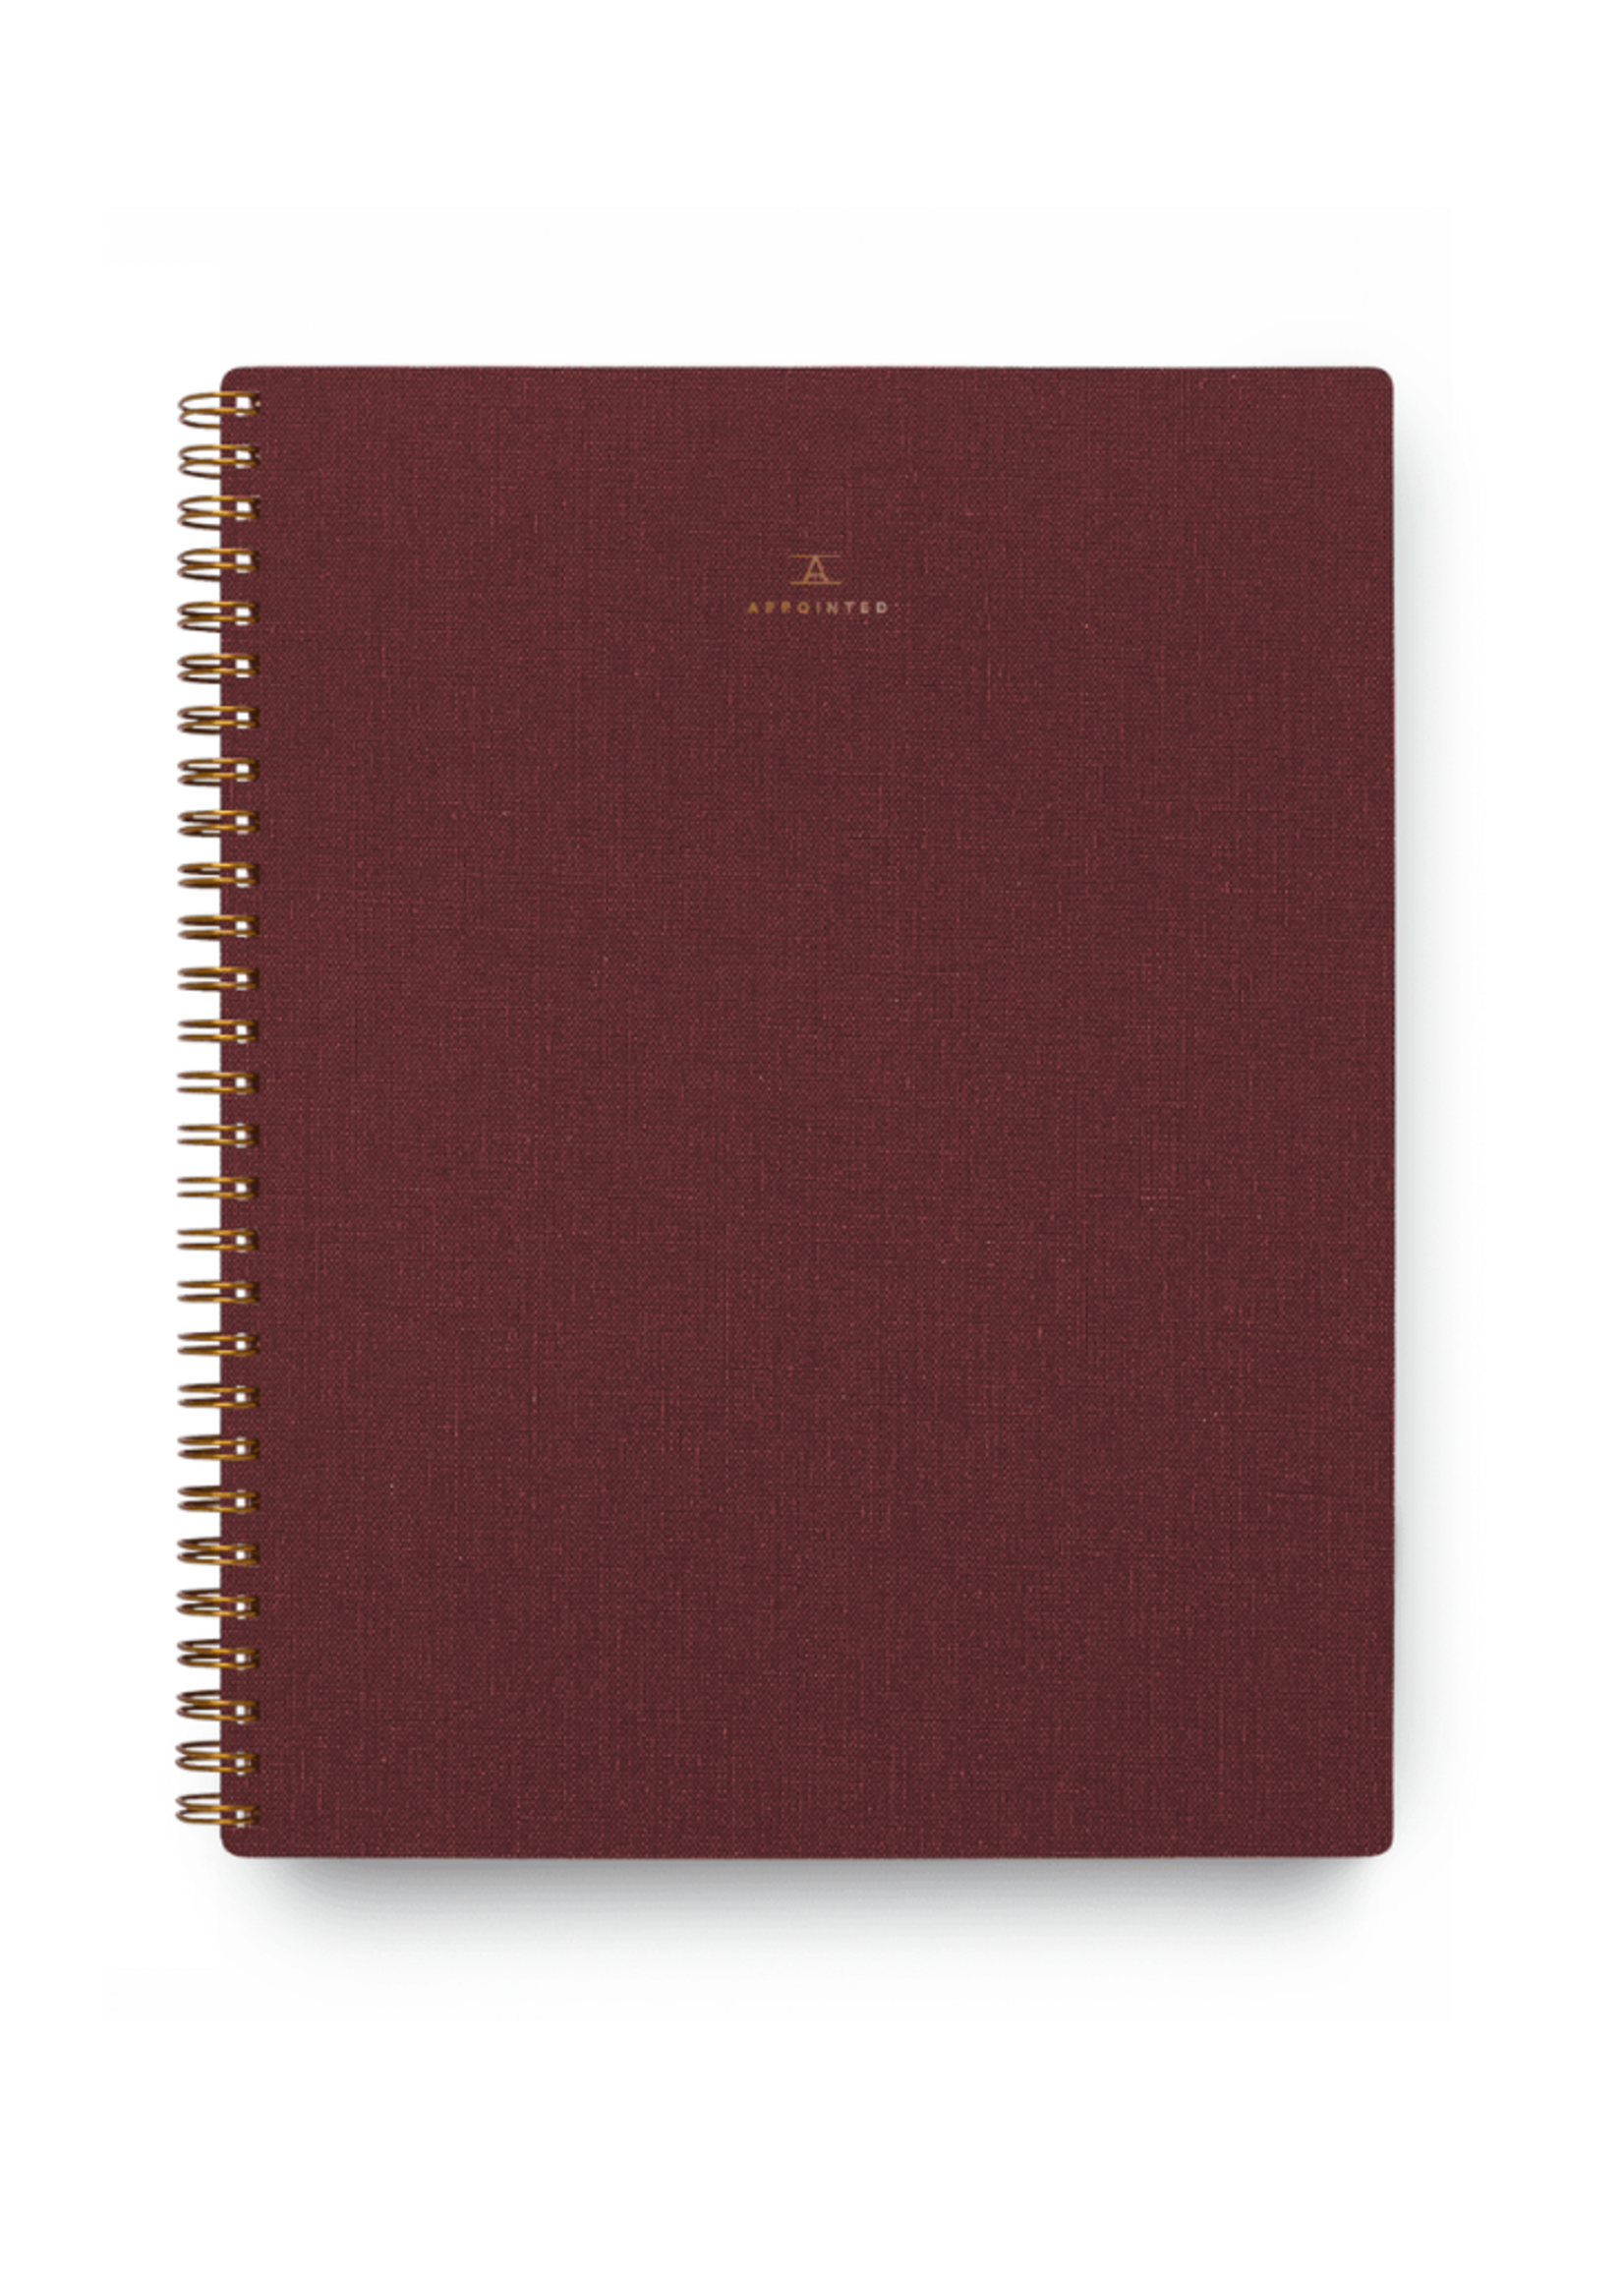 Appointed Appointed Notebook Blank - Rhubarb